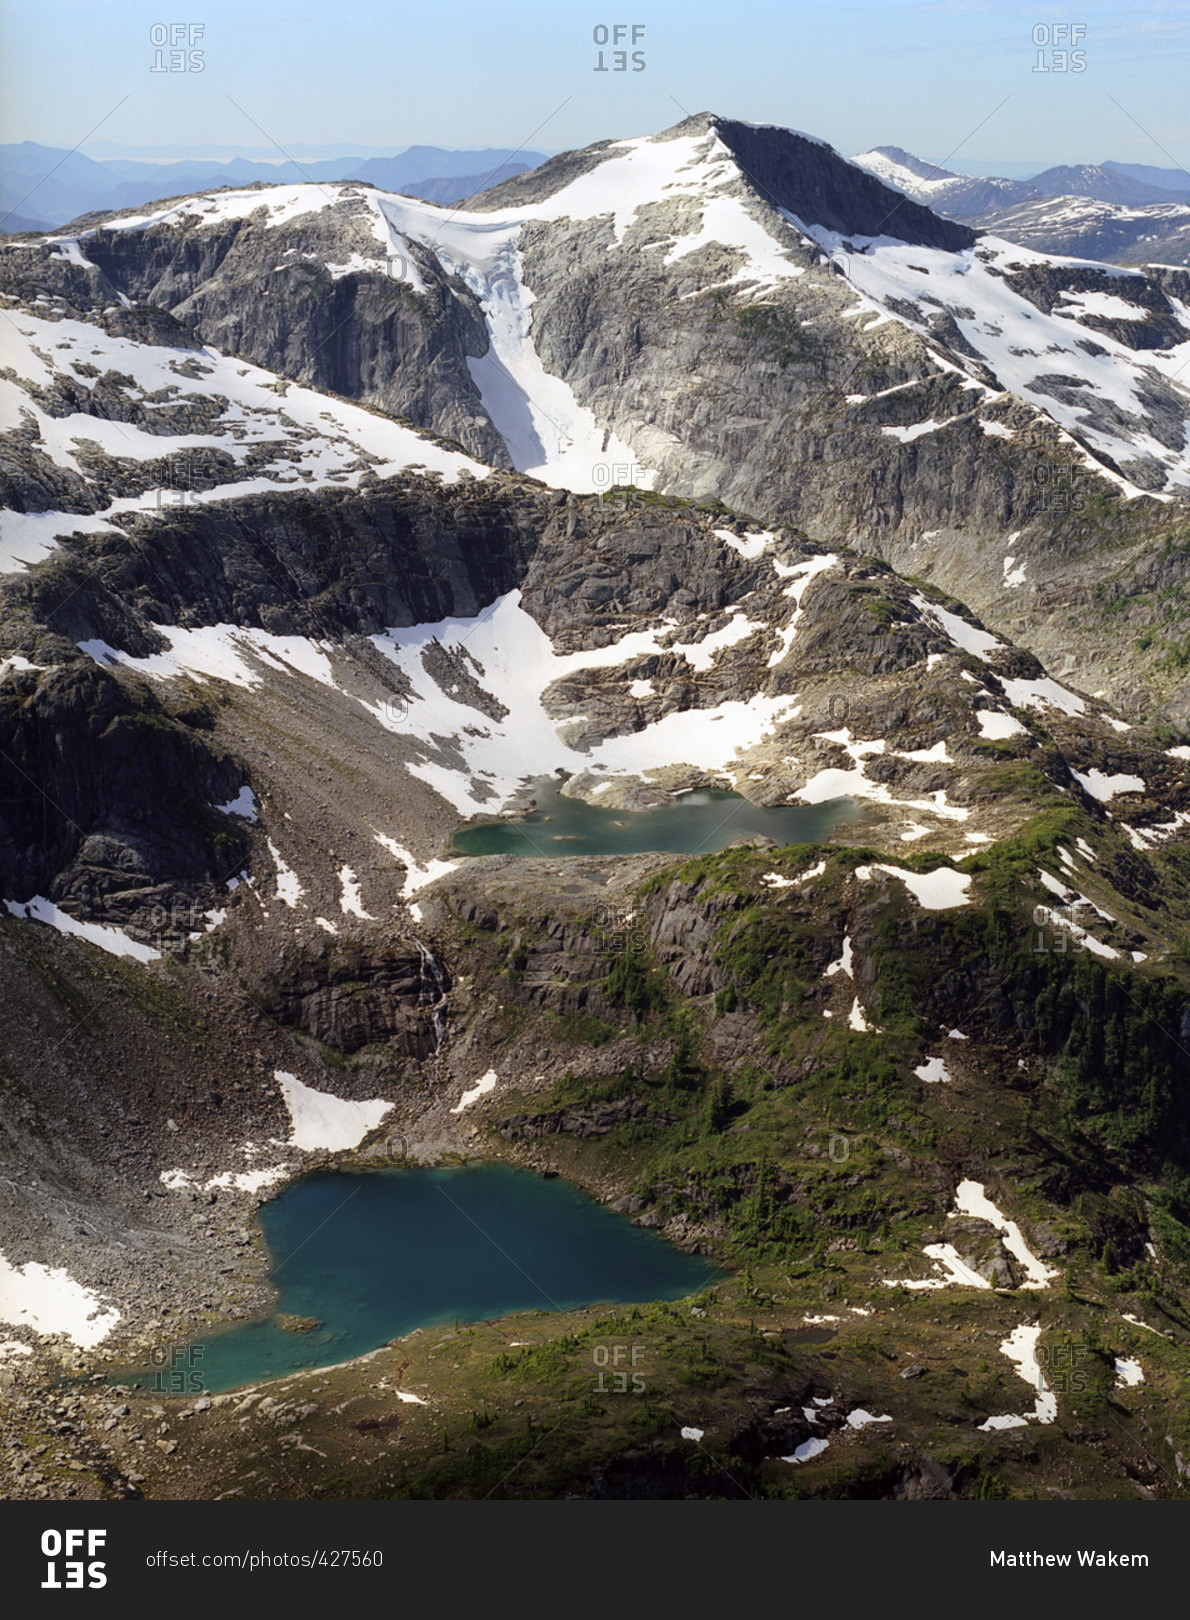 Arial view of two lakes between mountains